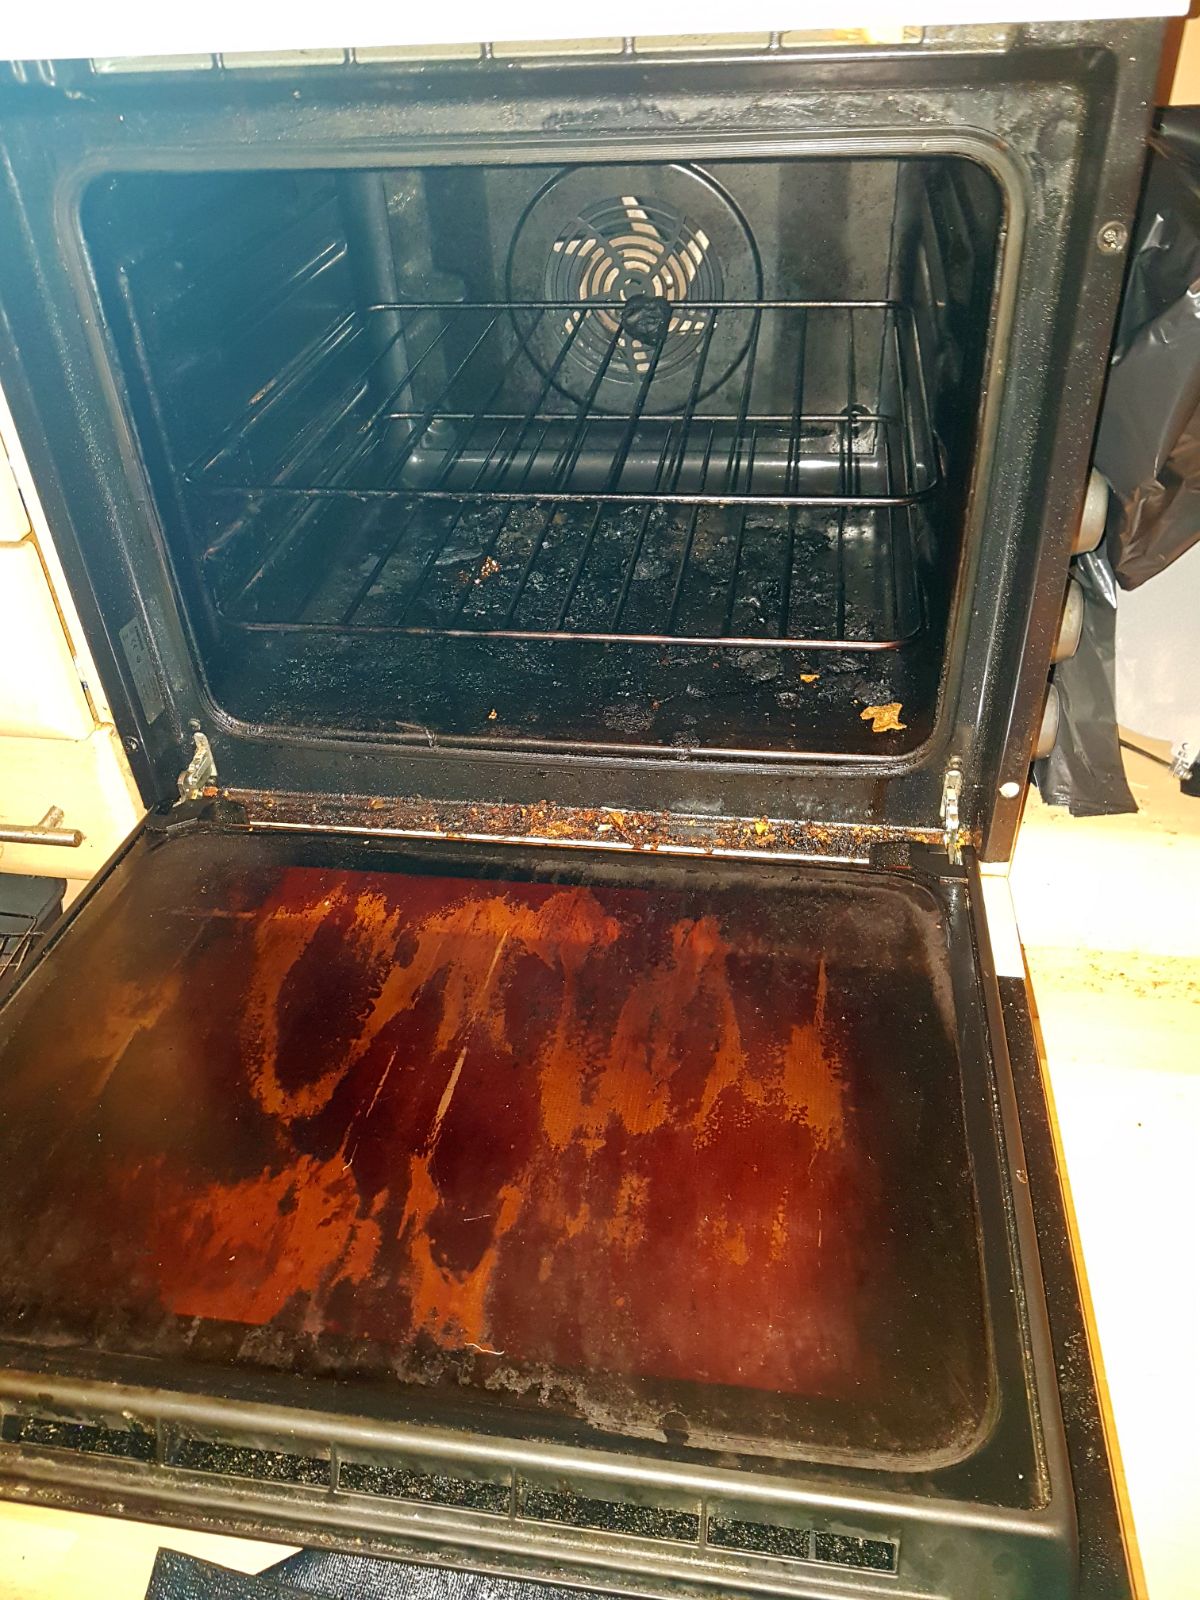 Dirty oven before cleaning